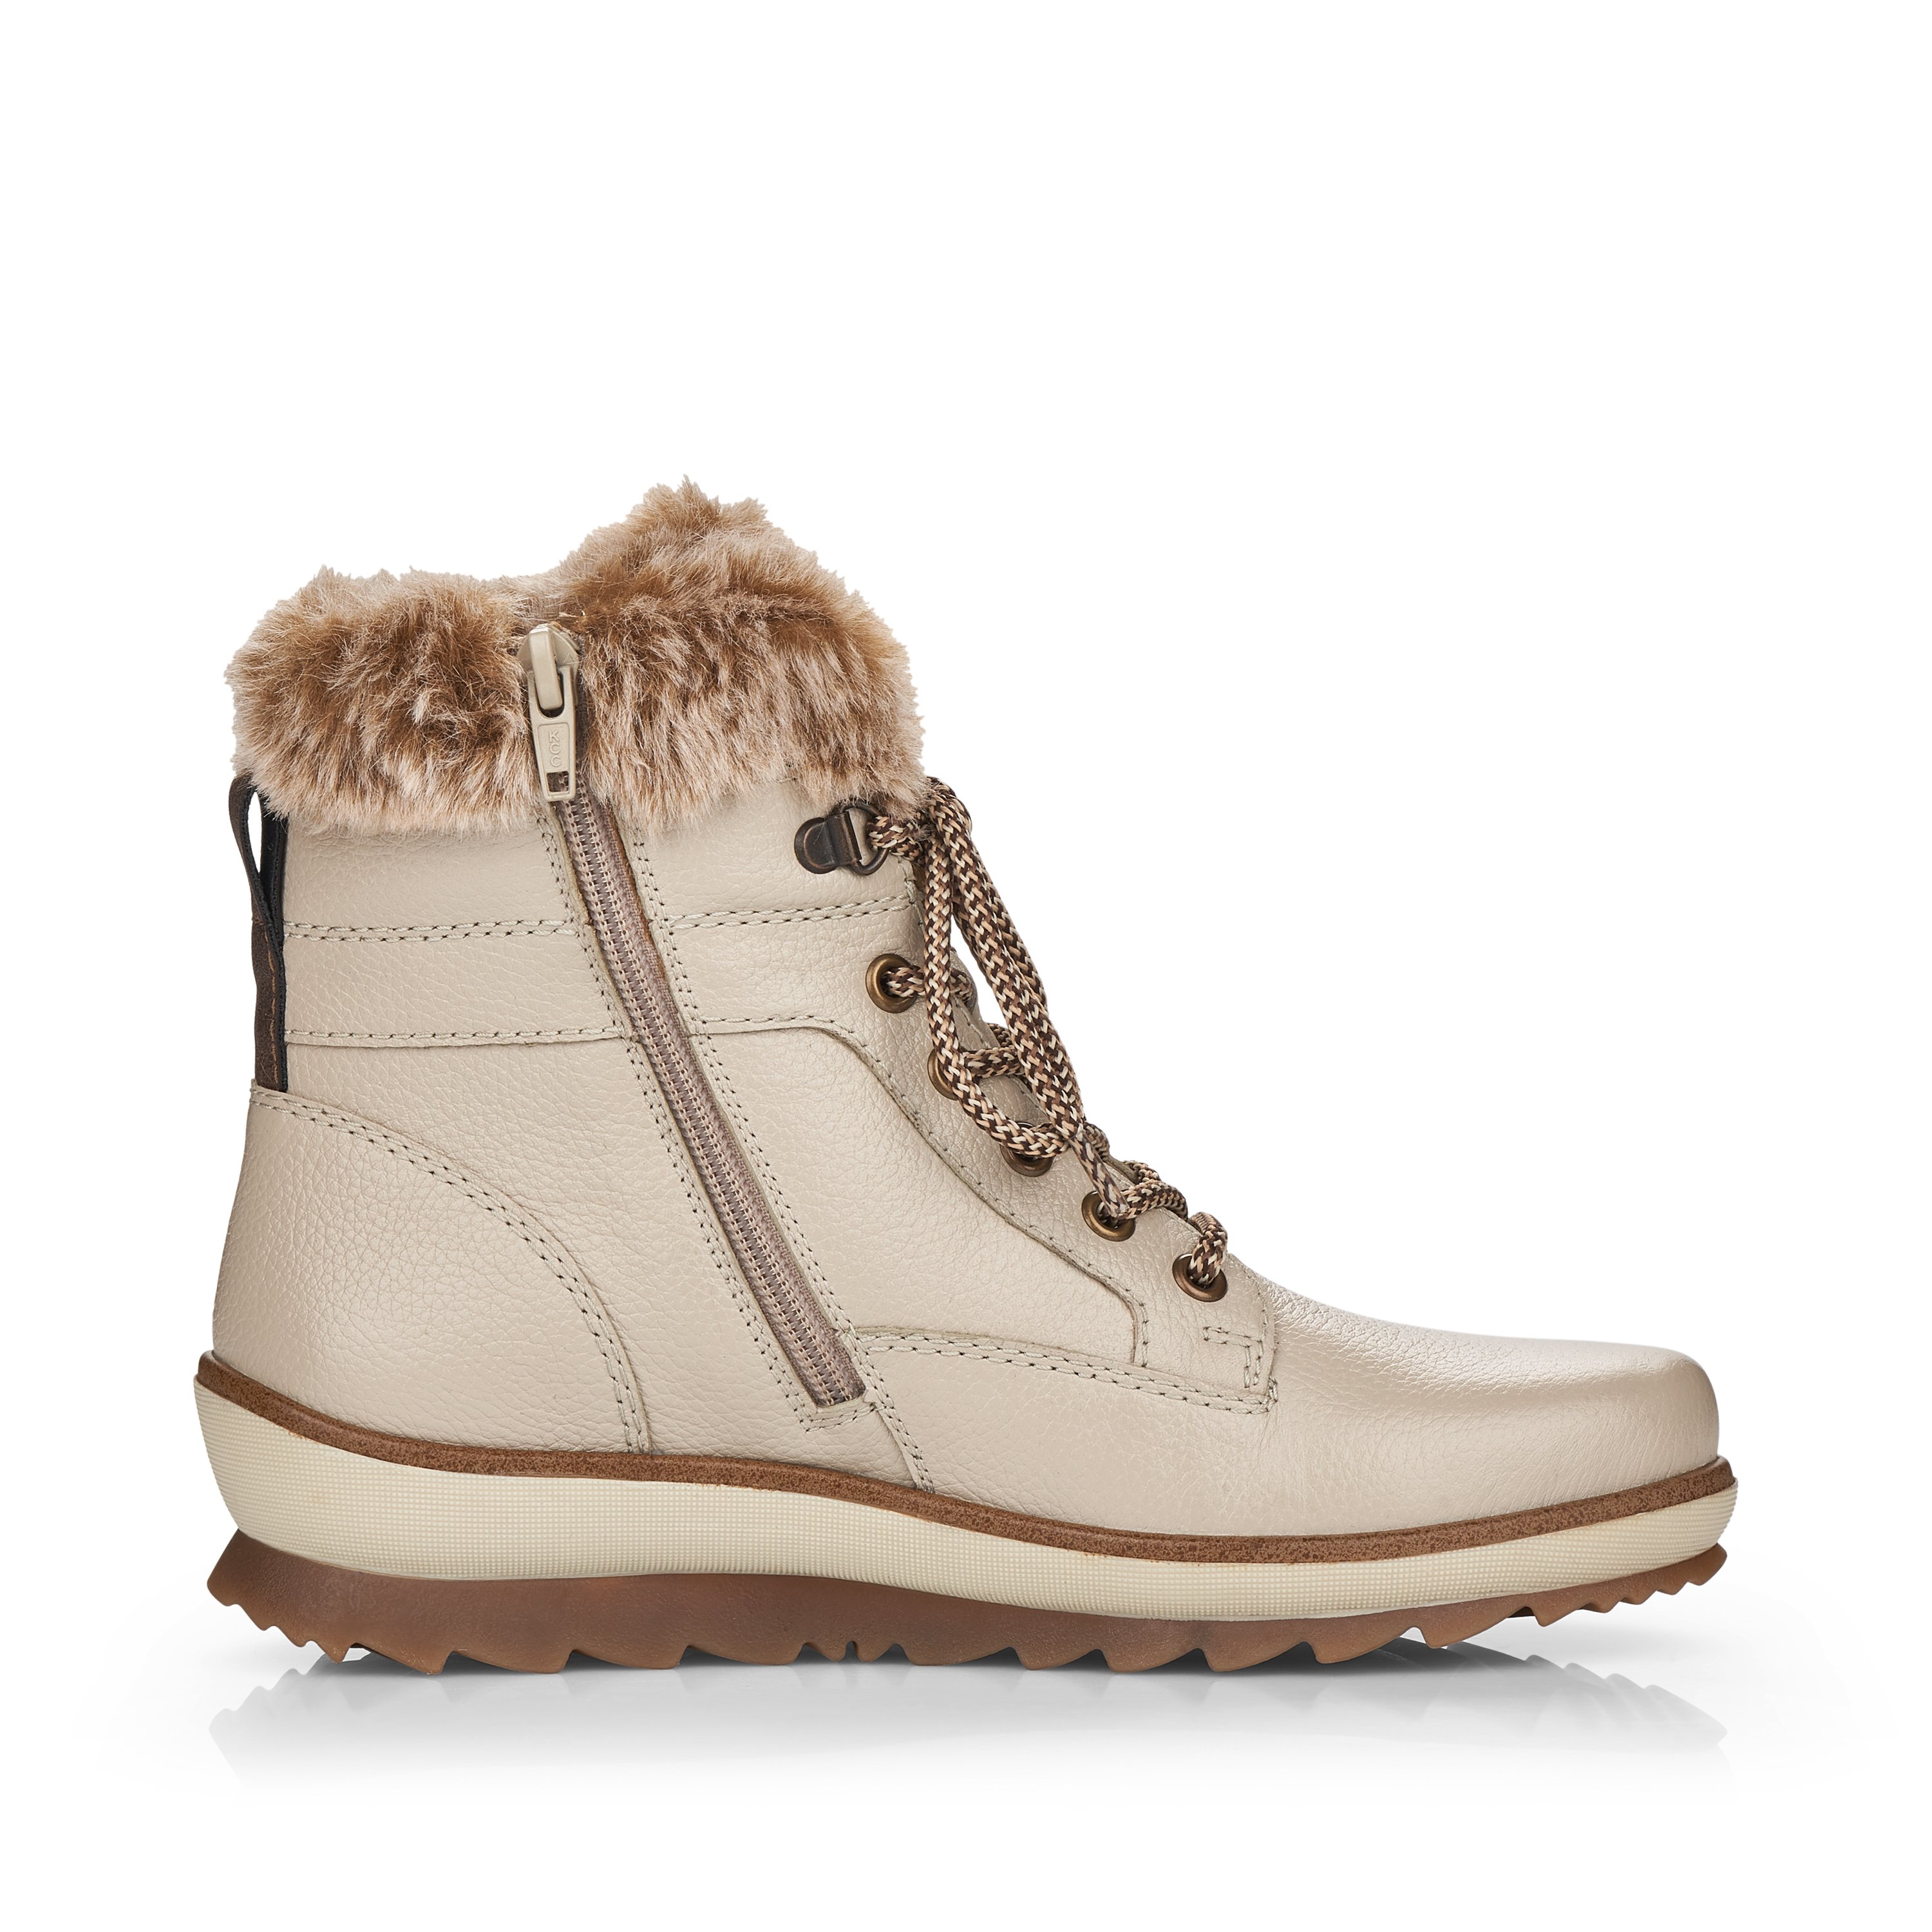 Brown beige remonte women´s lace-up boots R8477-60 with cushioning profile sole. Shoe inside